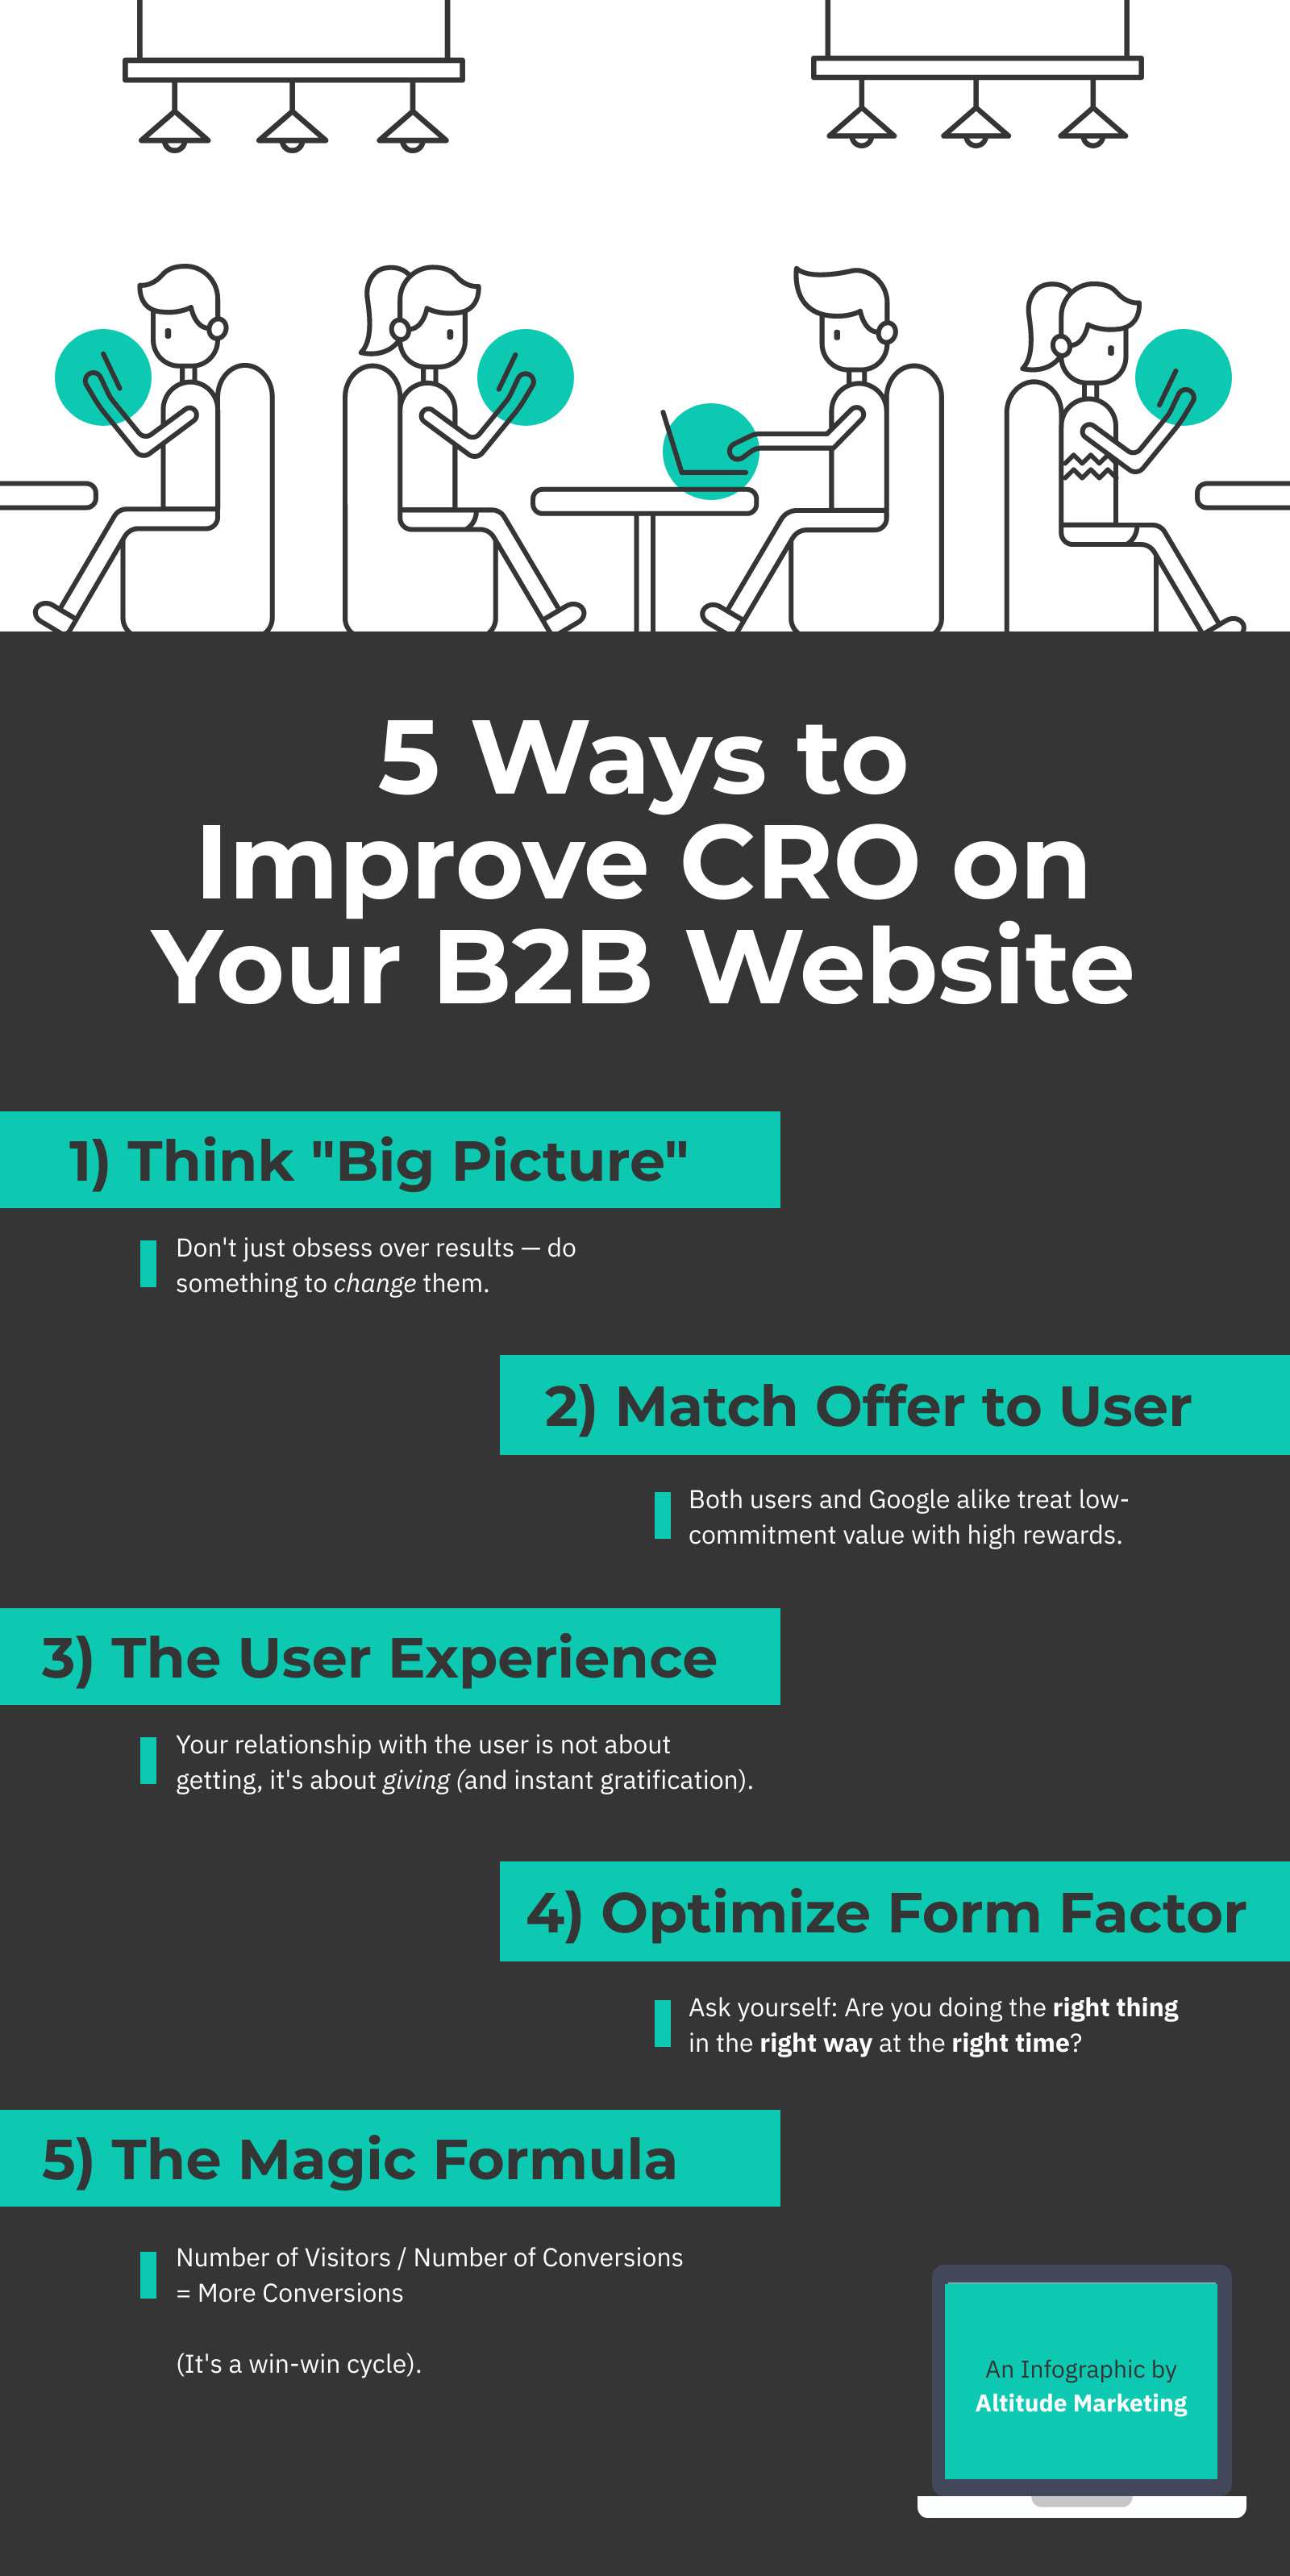 5 Ways to Improve Your B2B Website Conversion Rate